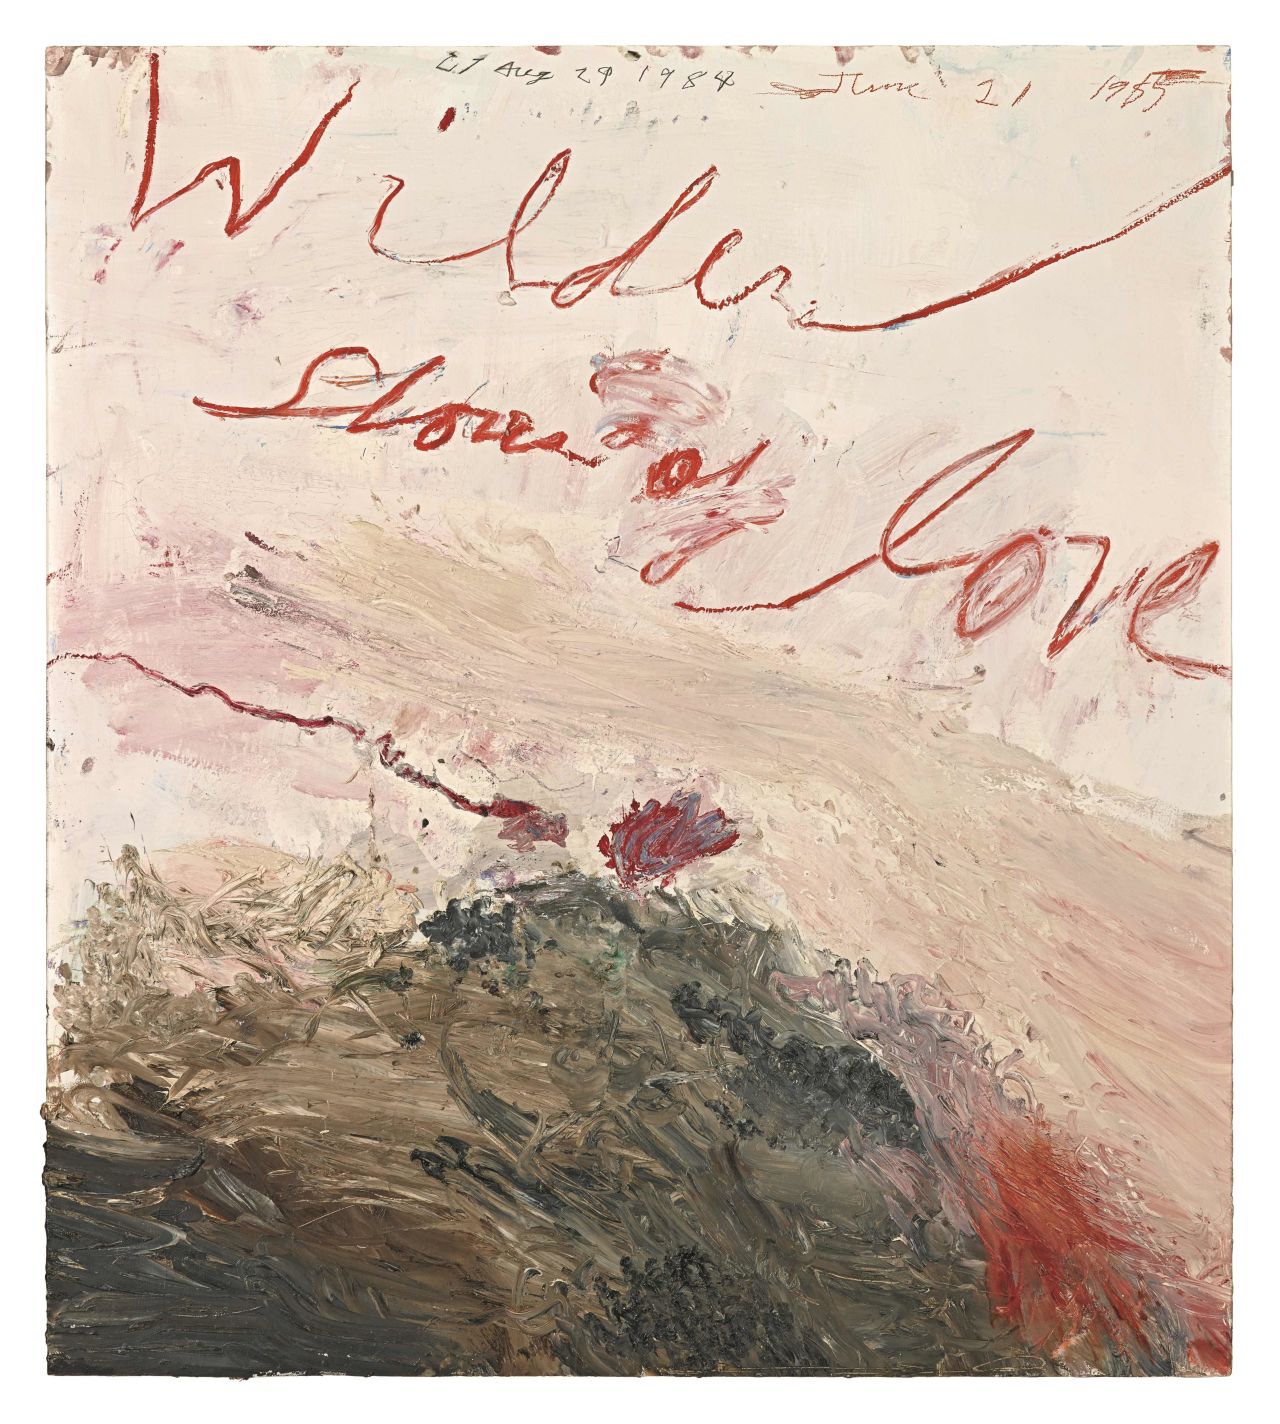 cy-twombly-wilder-shores-of-love-1985